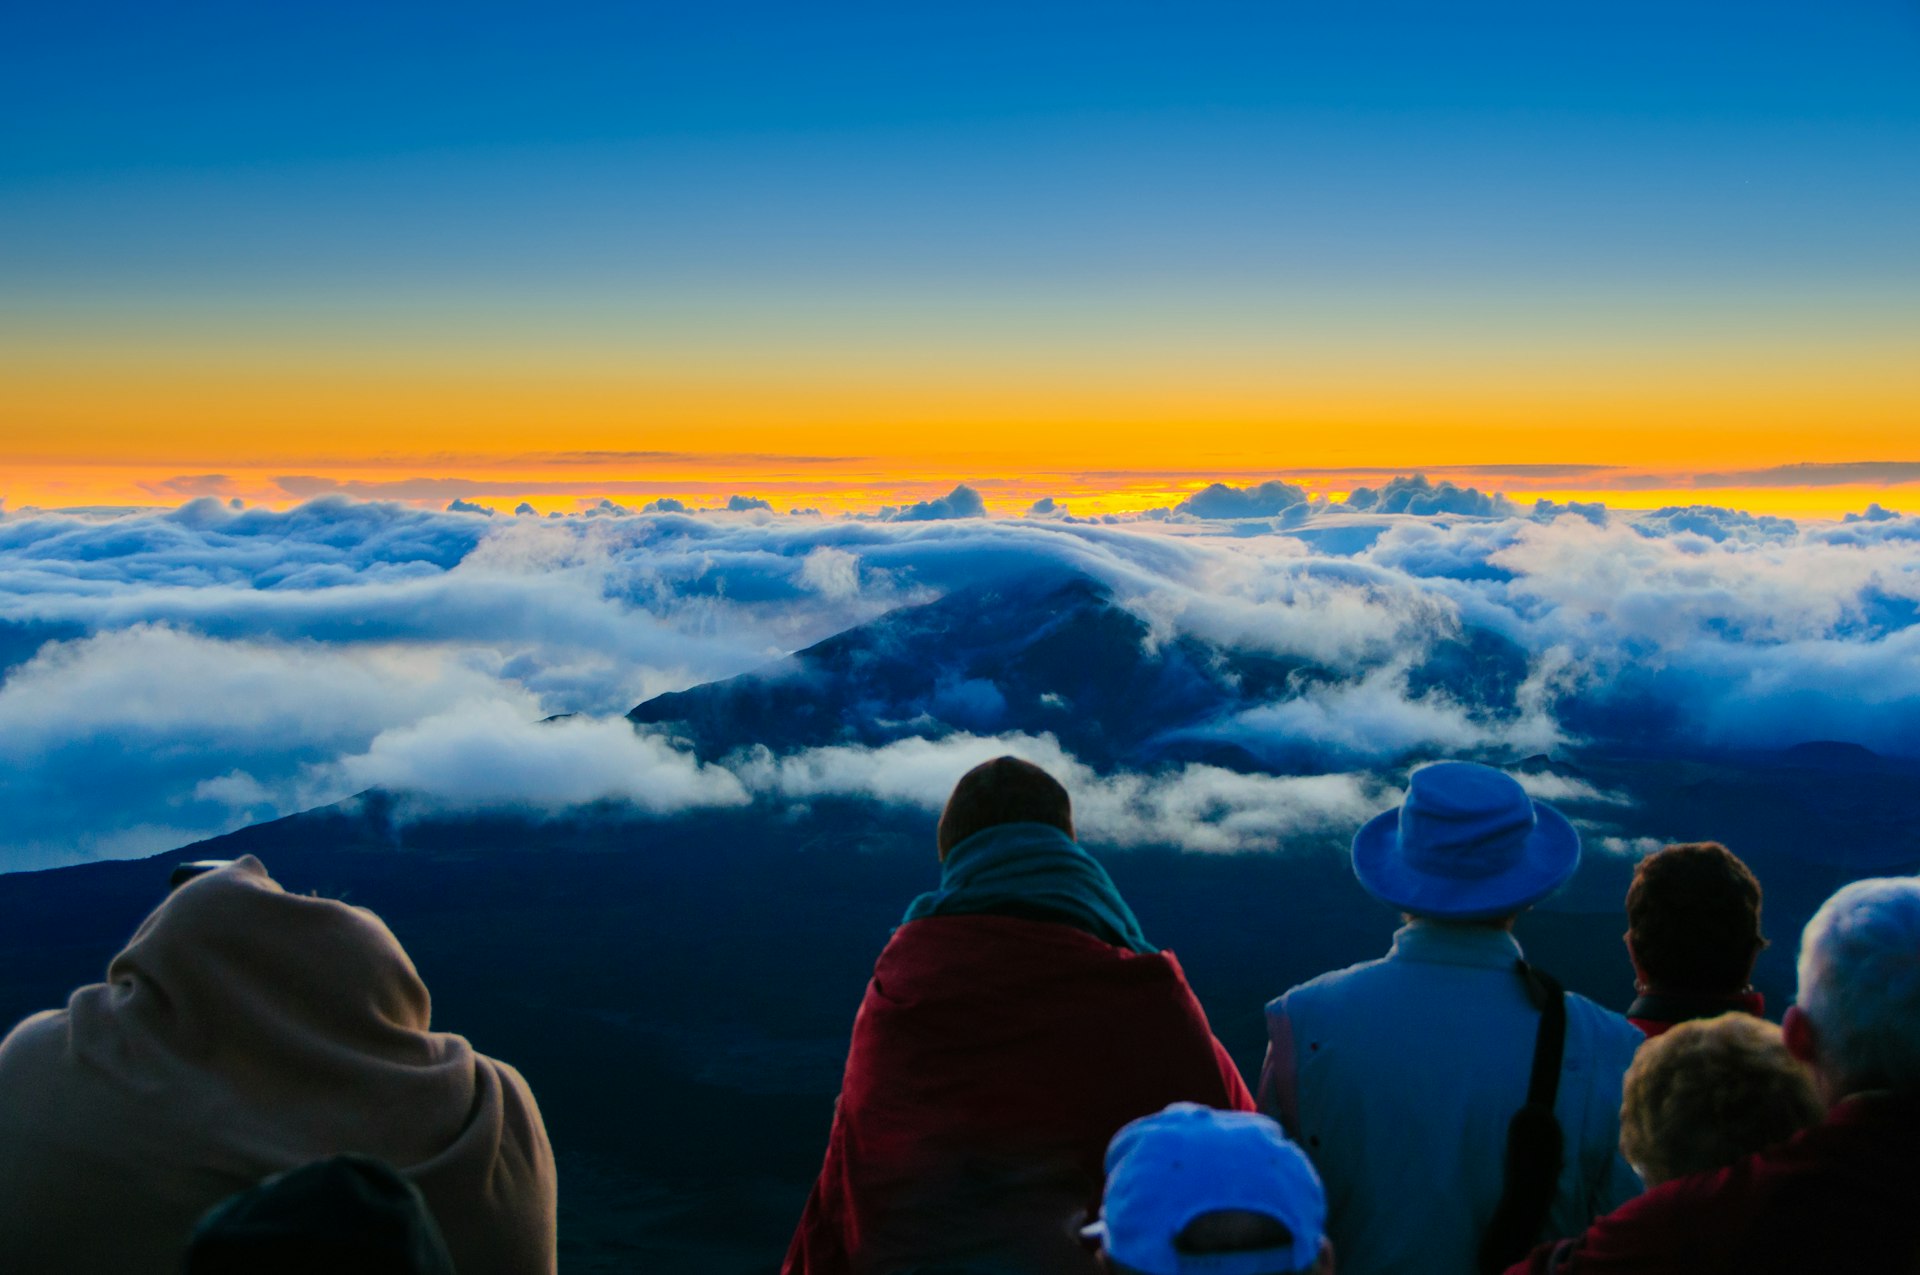 Sunrise over clouds and distant mountains from on top of Haleakala Crater, Maui, Hawaii, USA